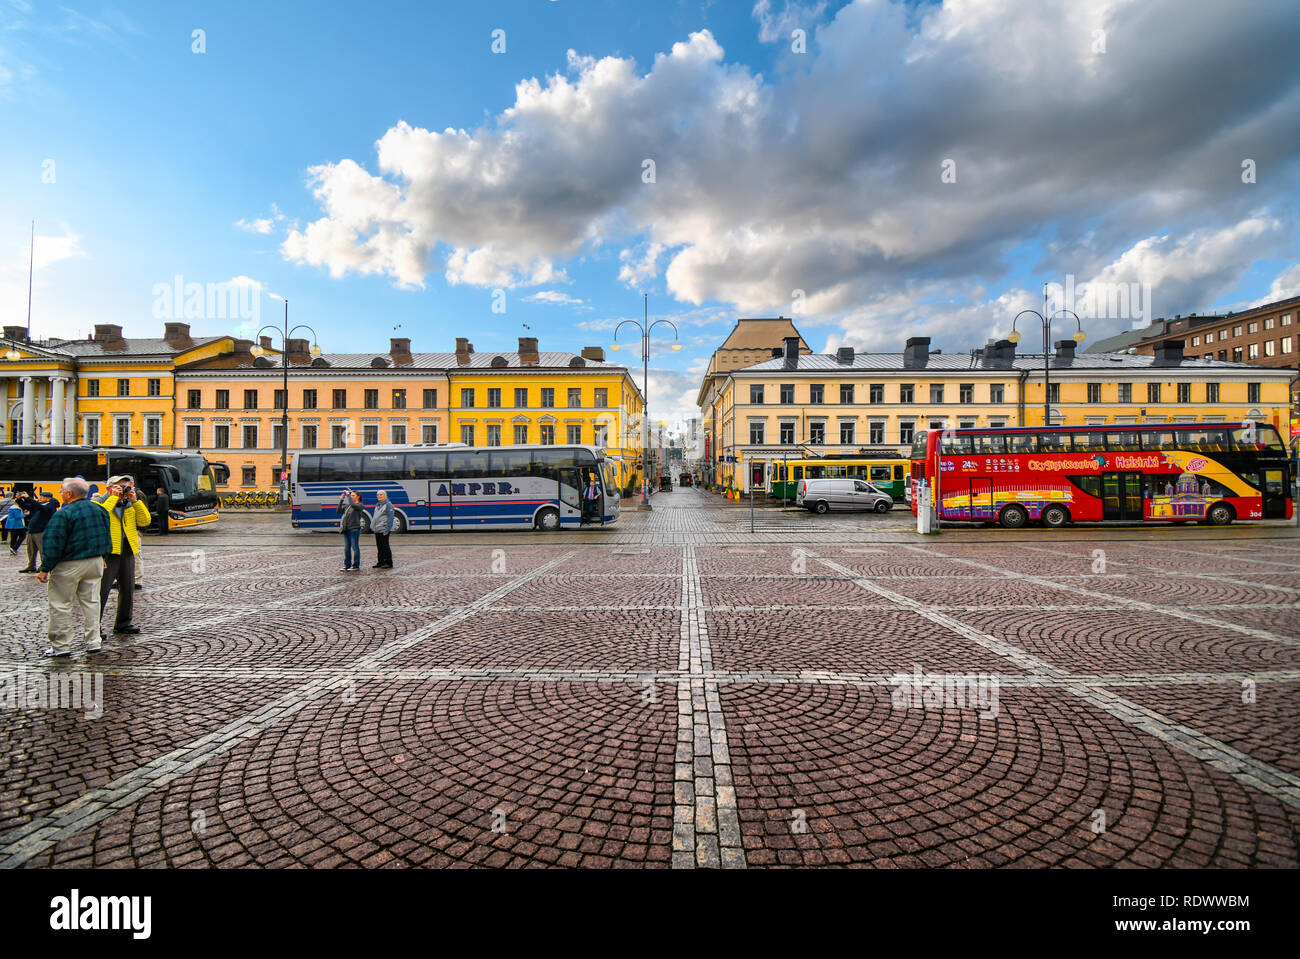 Tour busses line up at the Senate Square in Helsinki Finland with the  restored Sofiankatu Street in view. Stock Photo